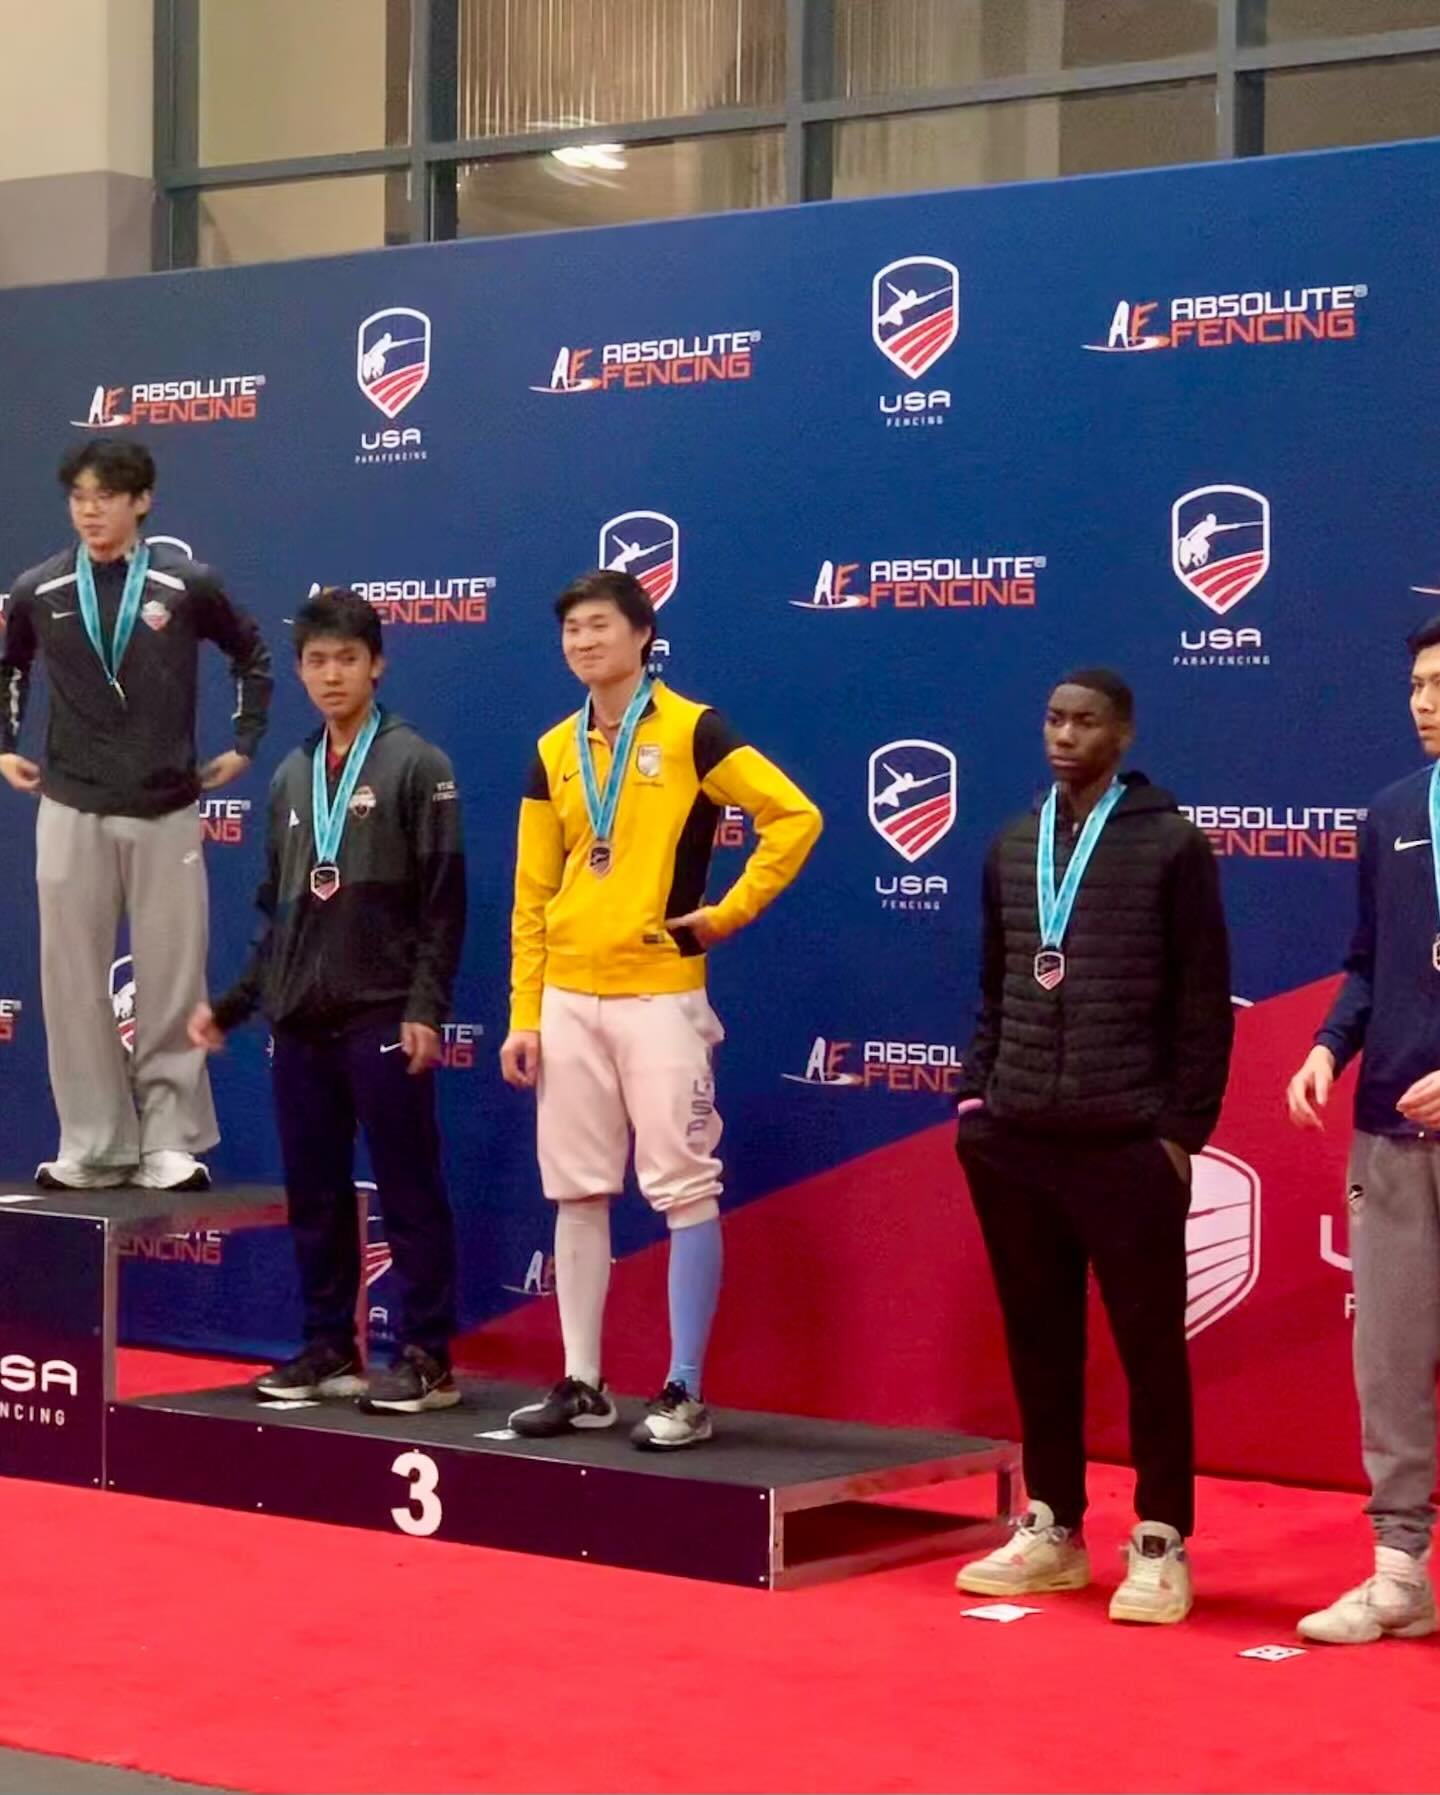 Awesome job by Biaya at Junior Olympics today!! He made Top 8 (7th place🏅) in the Junior Men&rsquo;s Foil event!! Congratulations Biaya!!!🤺👏👏🎉